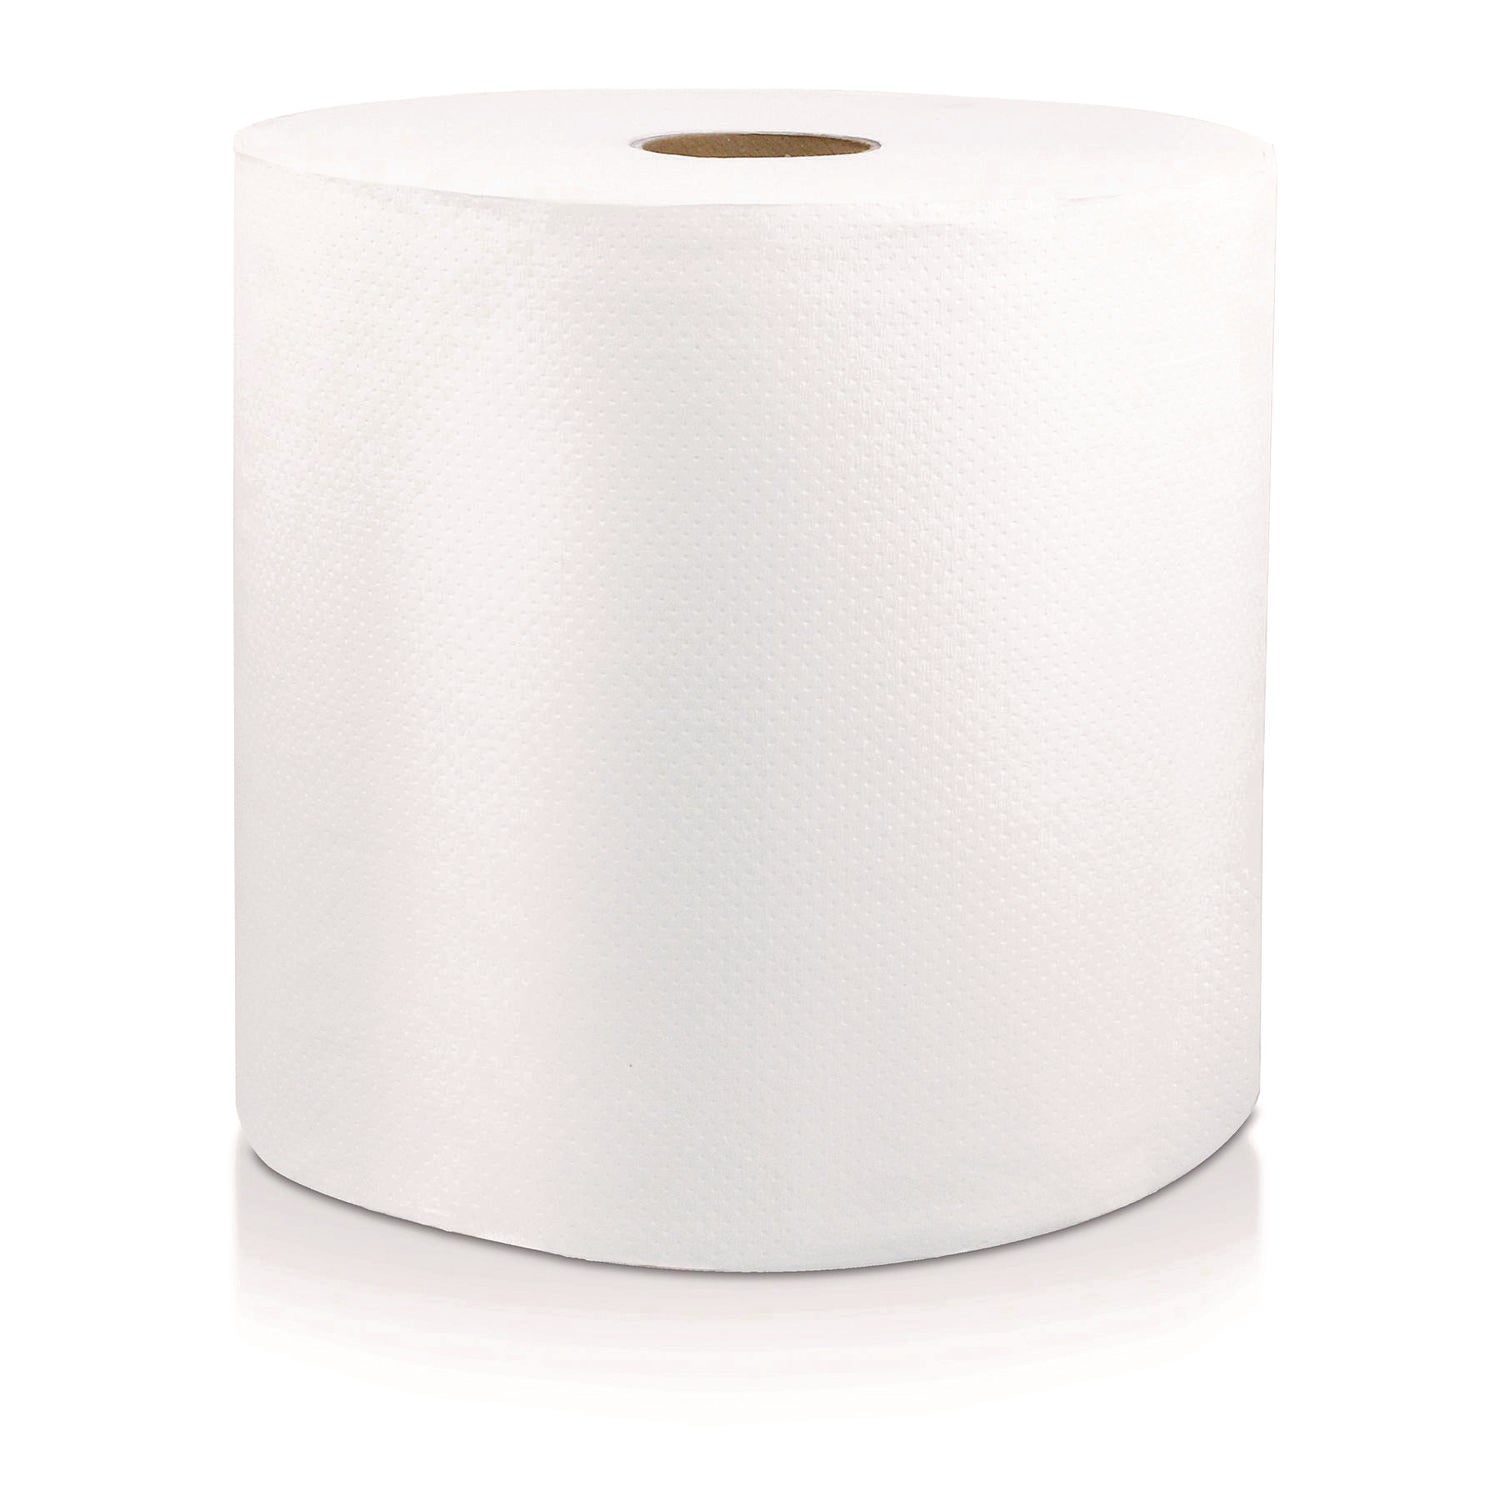 Livi Solaris Paper Hardwound Paper Towels - 1 Ply - 8" x 800 ft - White - Virgin Fiber - Embossed, Absorbent, Durable - For Hand - 6 / Carton - 1